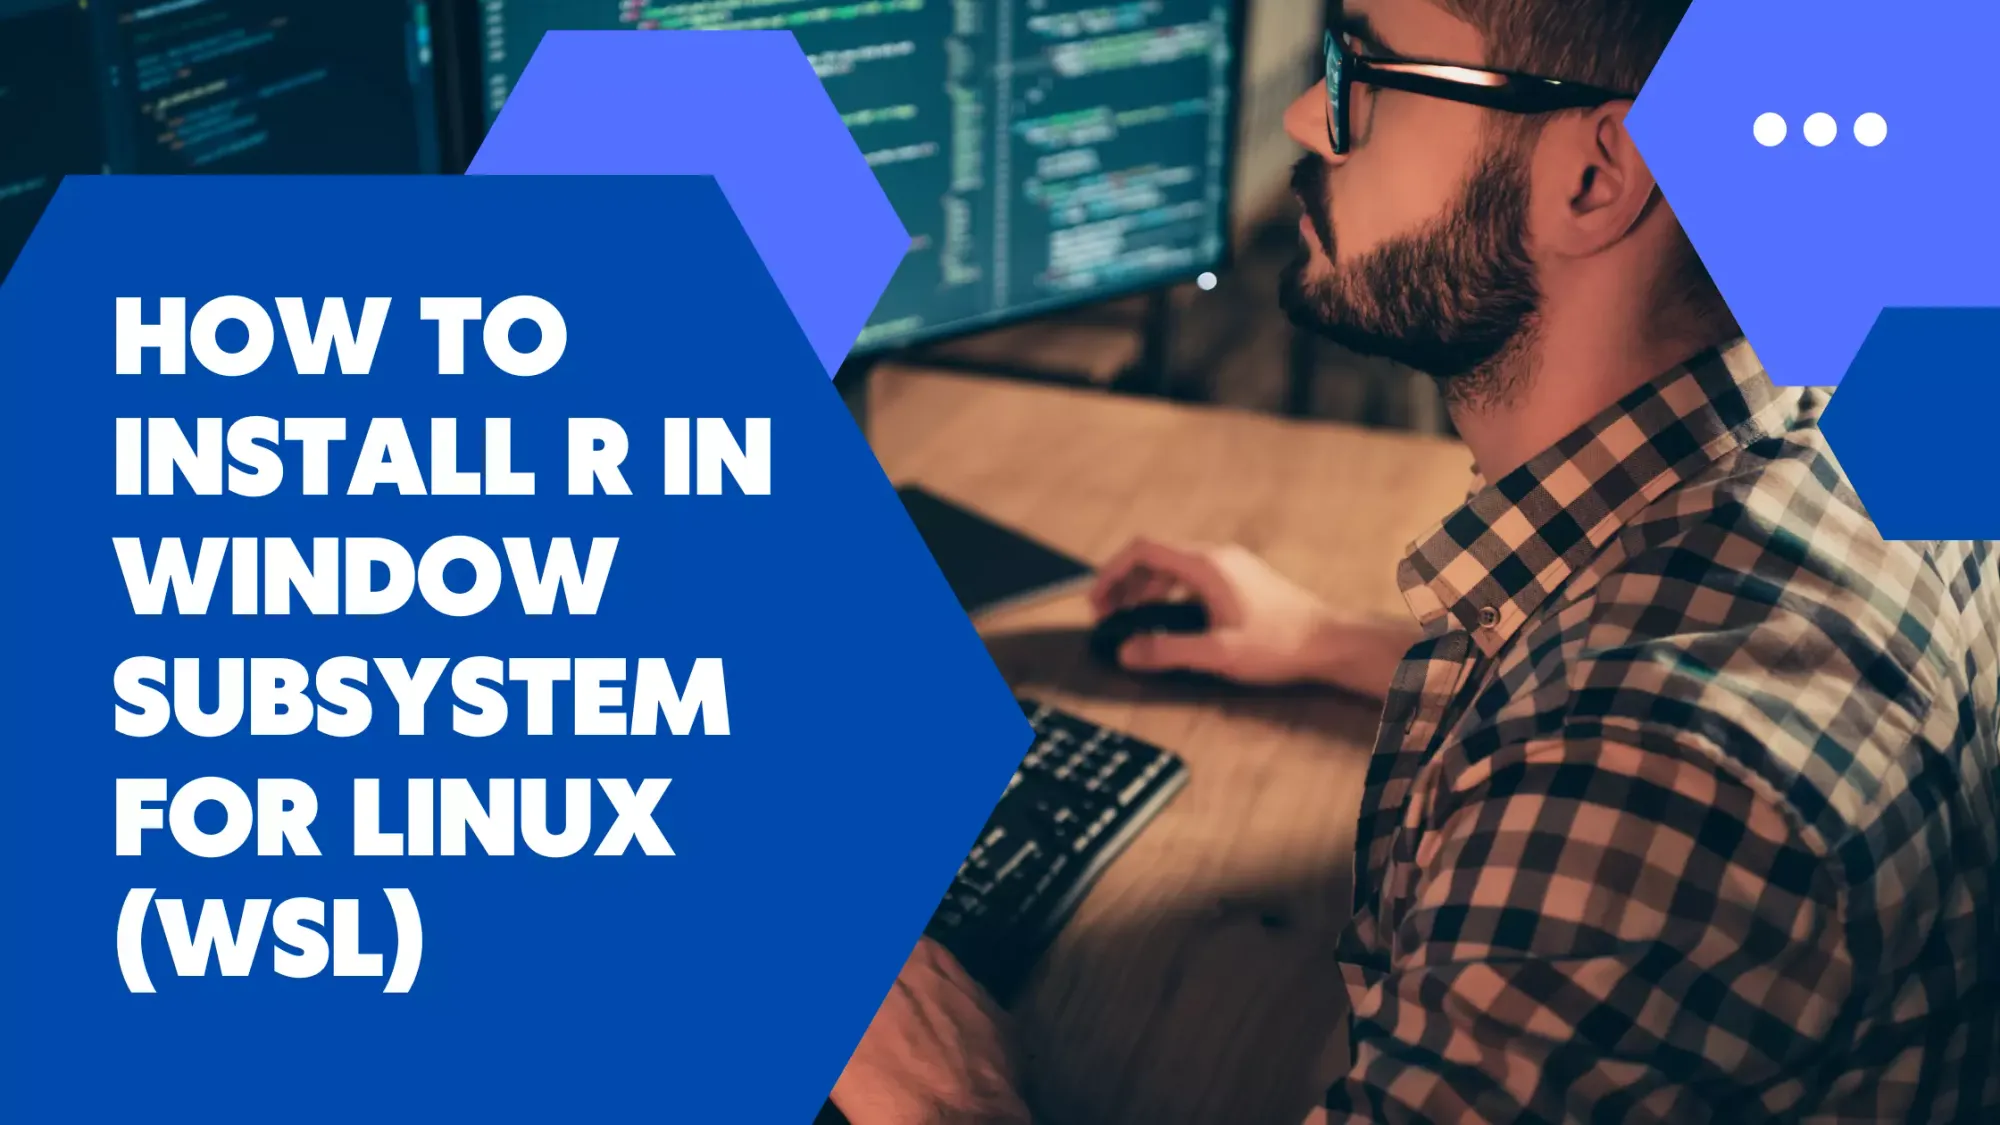 How to Install R in Windows Subsystem for Linux (WSL)